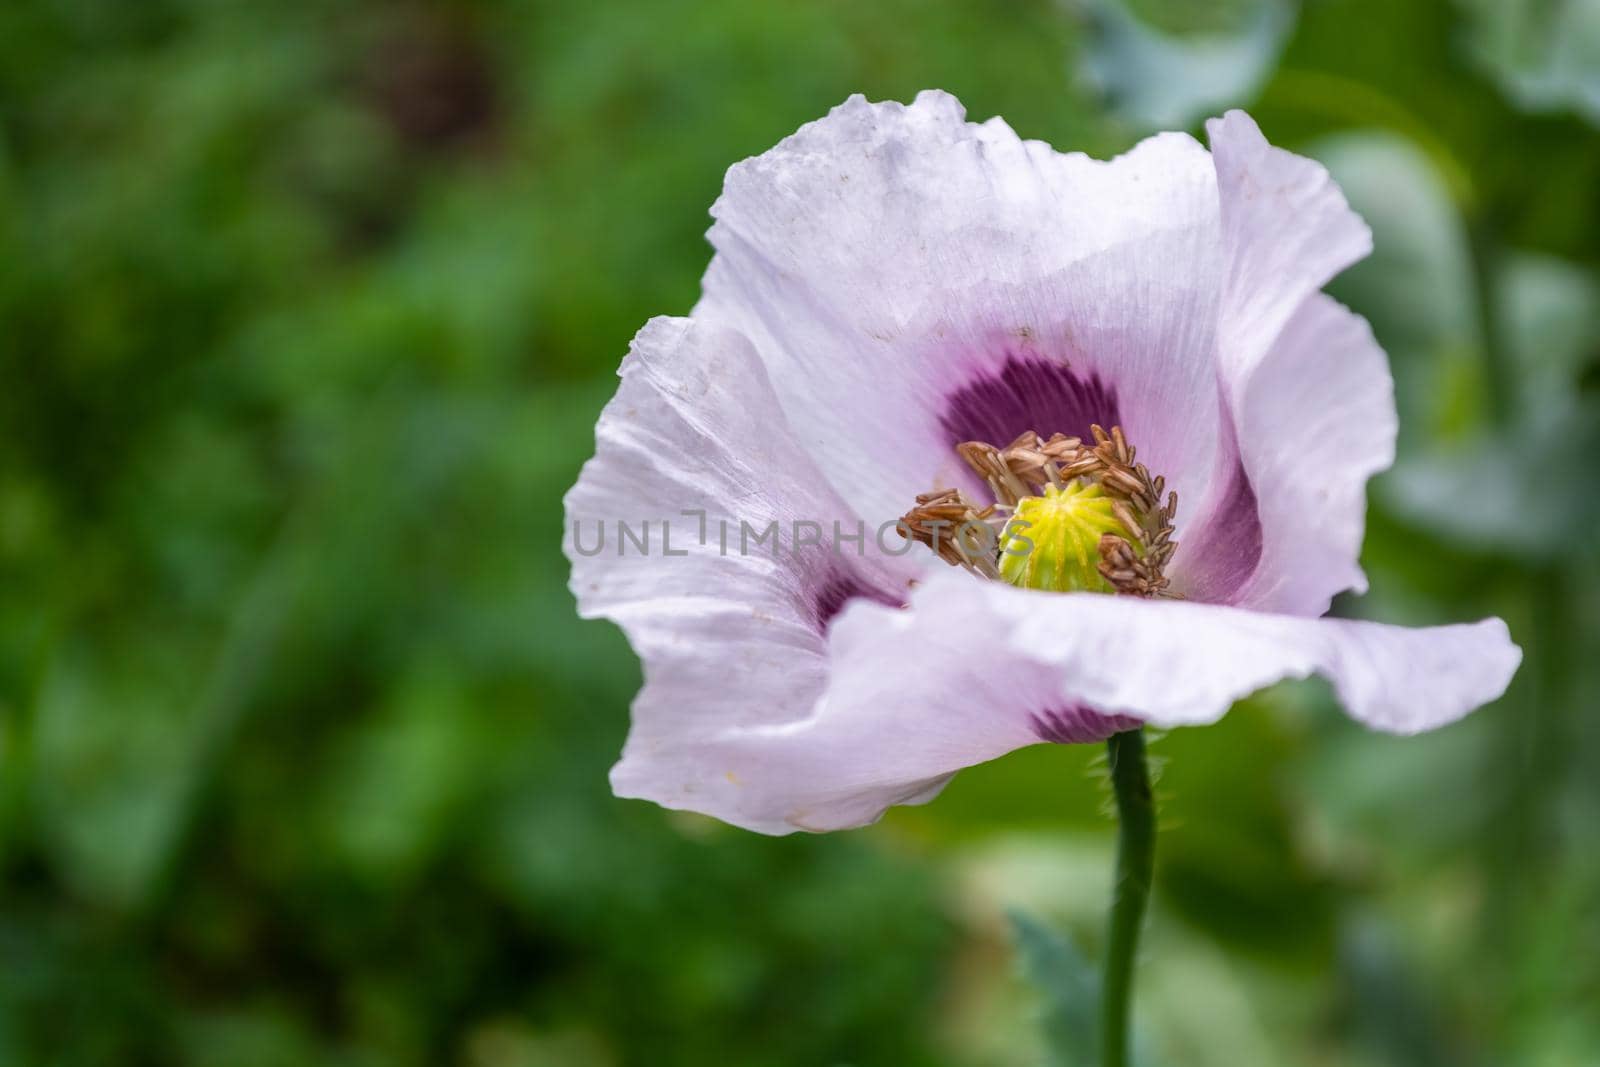 Purple poppy flower in a field close-up on a blurred green background of leaves.